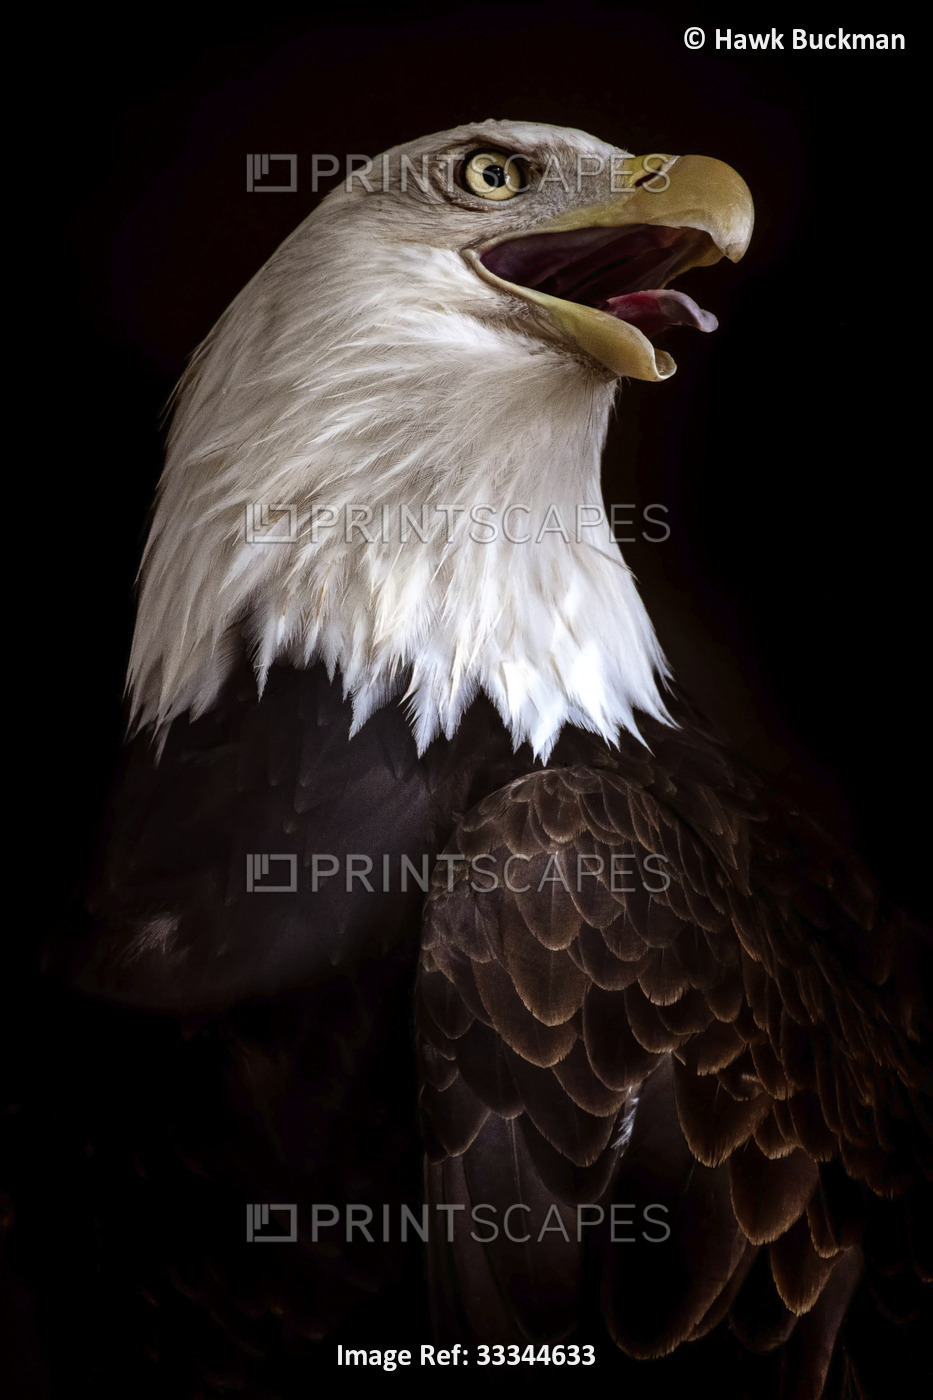 A Bald eagle (Haliaeetus leucocephalus) with mouth open and tongue out on a ...